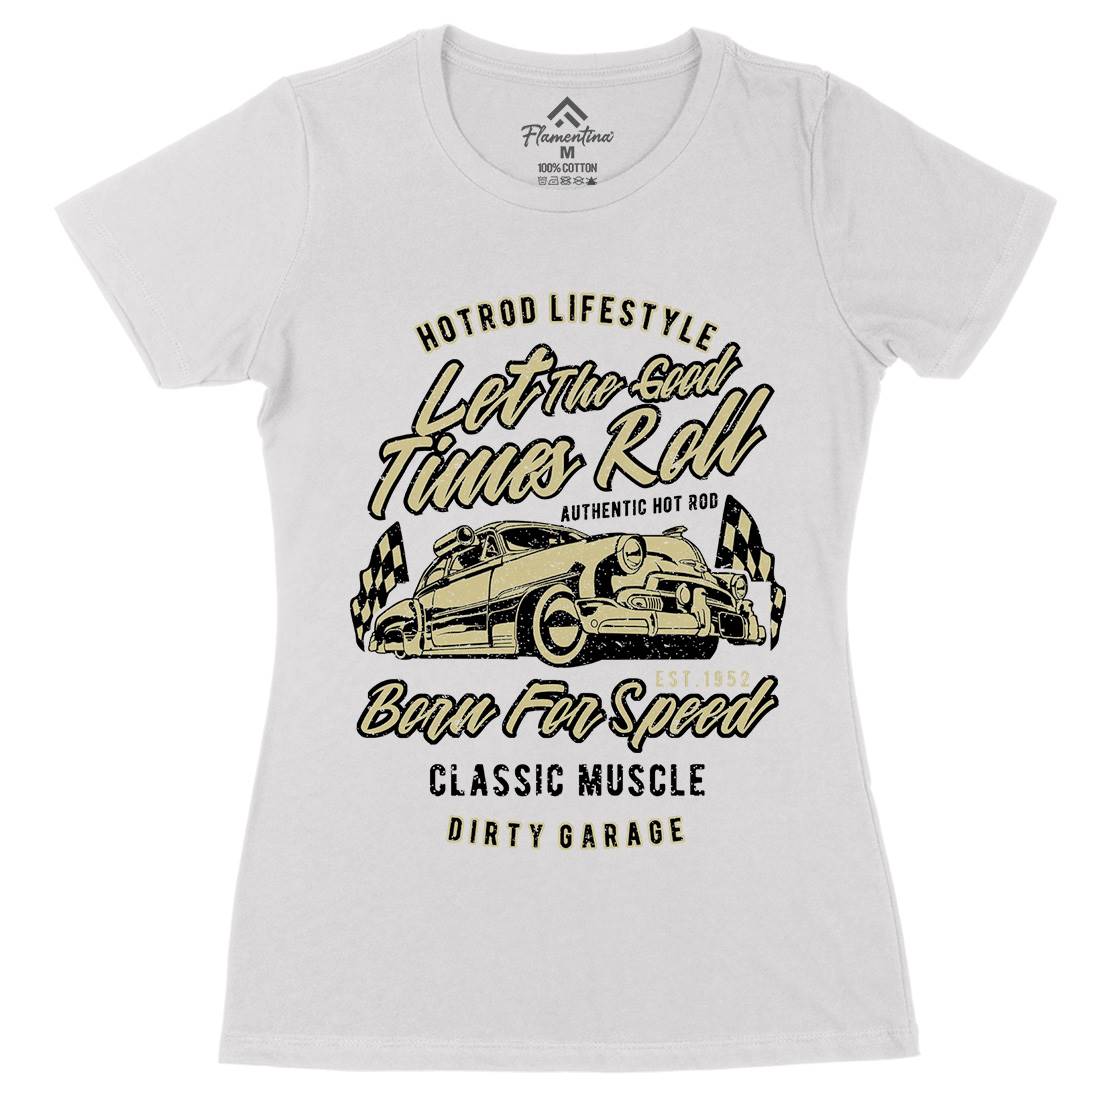 Let The Good Times Roll Womens Organic Crew Neck T-Shirt Cars A705